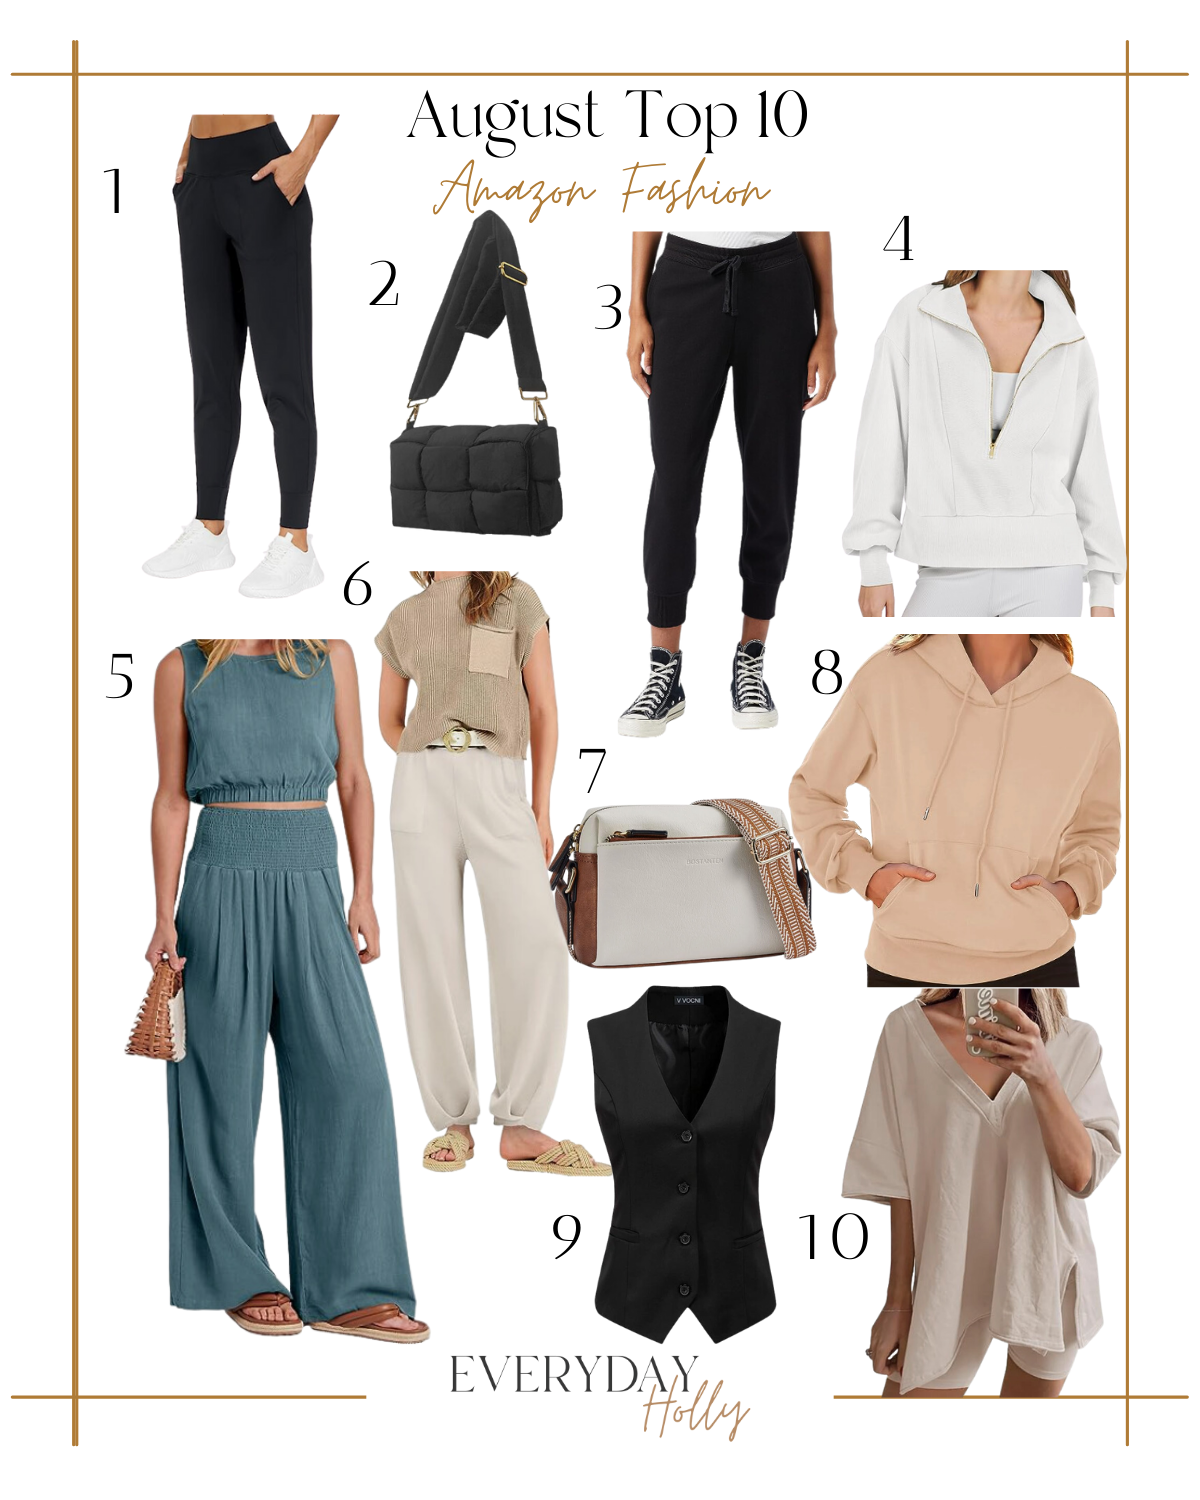 top 10 august best sellers | #top10 #august #monthlytopsellers #fall #fashion #home #beauty #LTK #matchingsets #purse #sweatshirt #hoodie #amazon #budgetfriendly